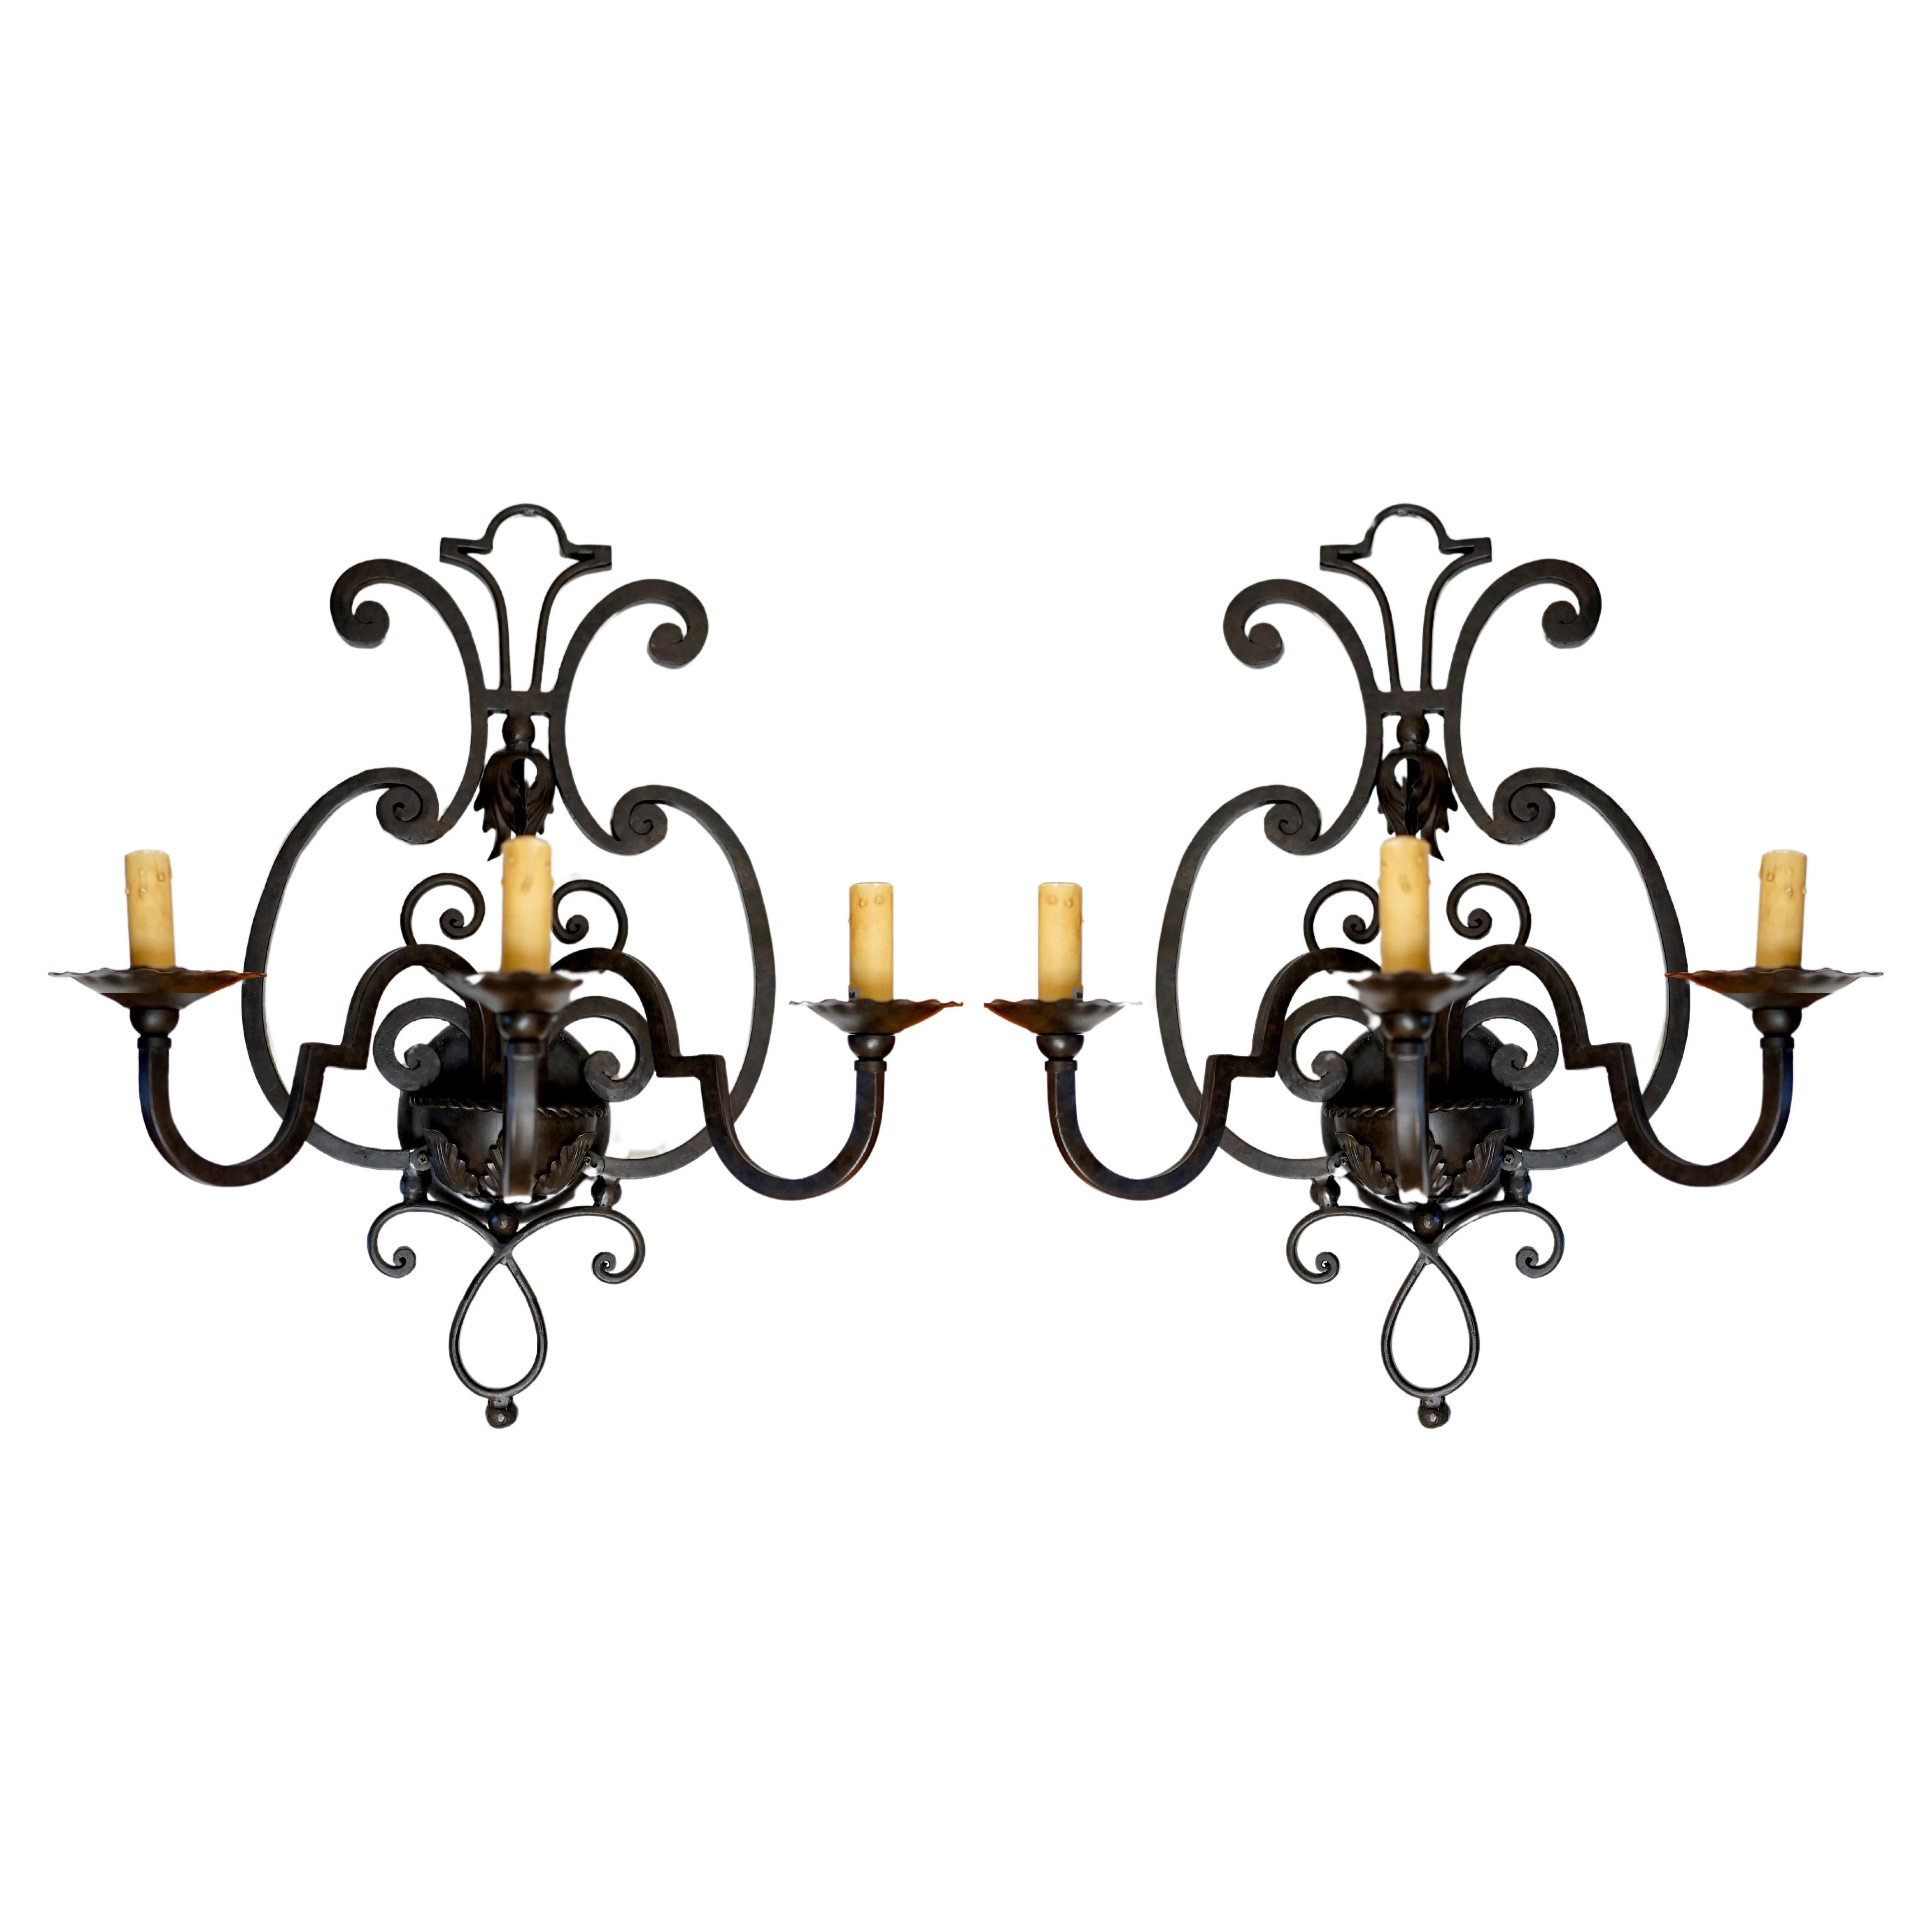 Pair of Arte de Mexico Wrought Iron Sconces with Mica Shades For Sale